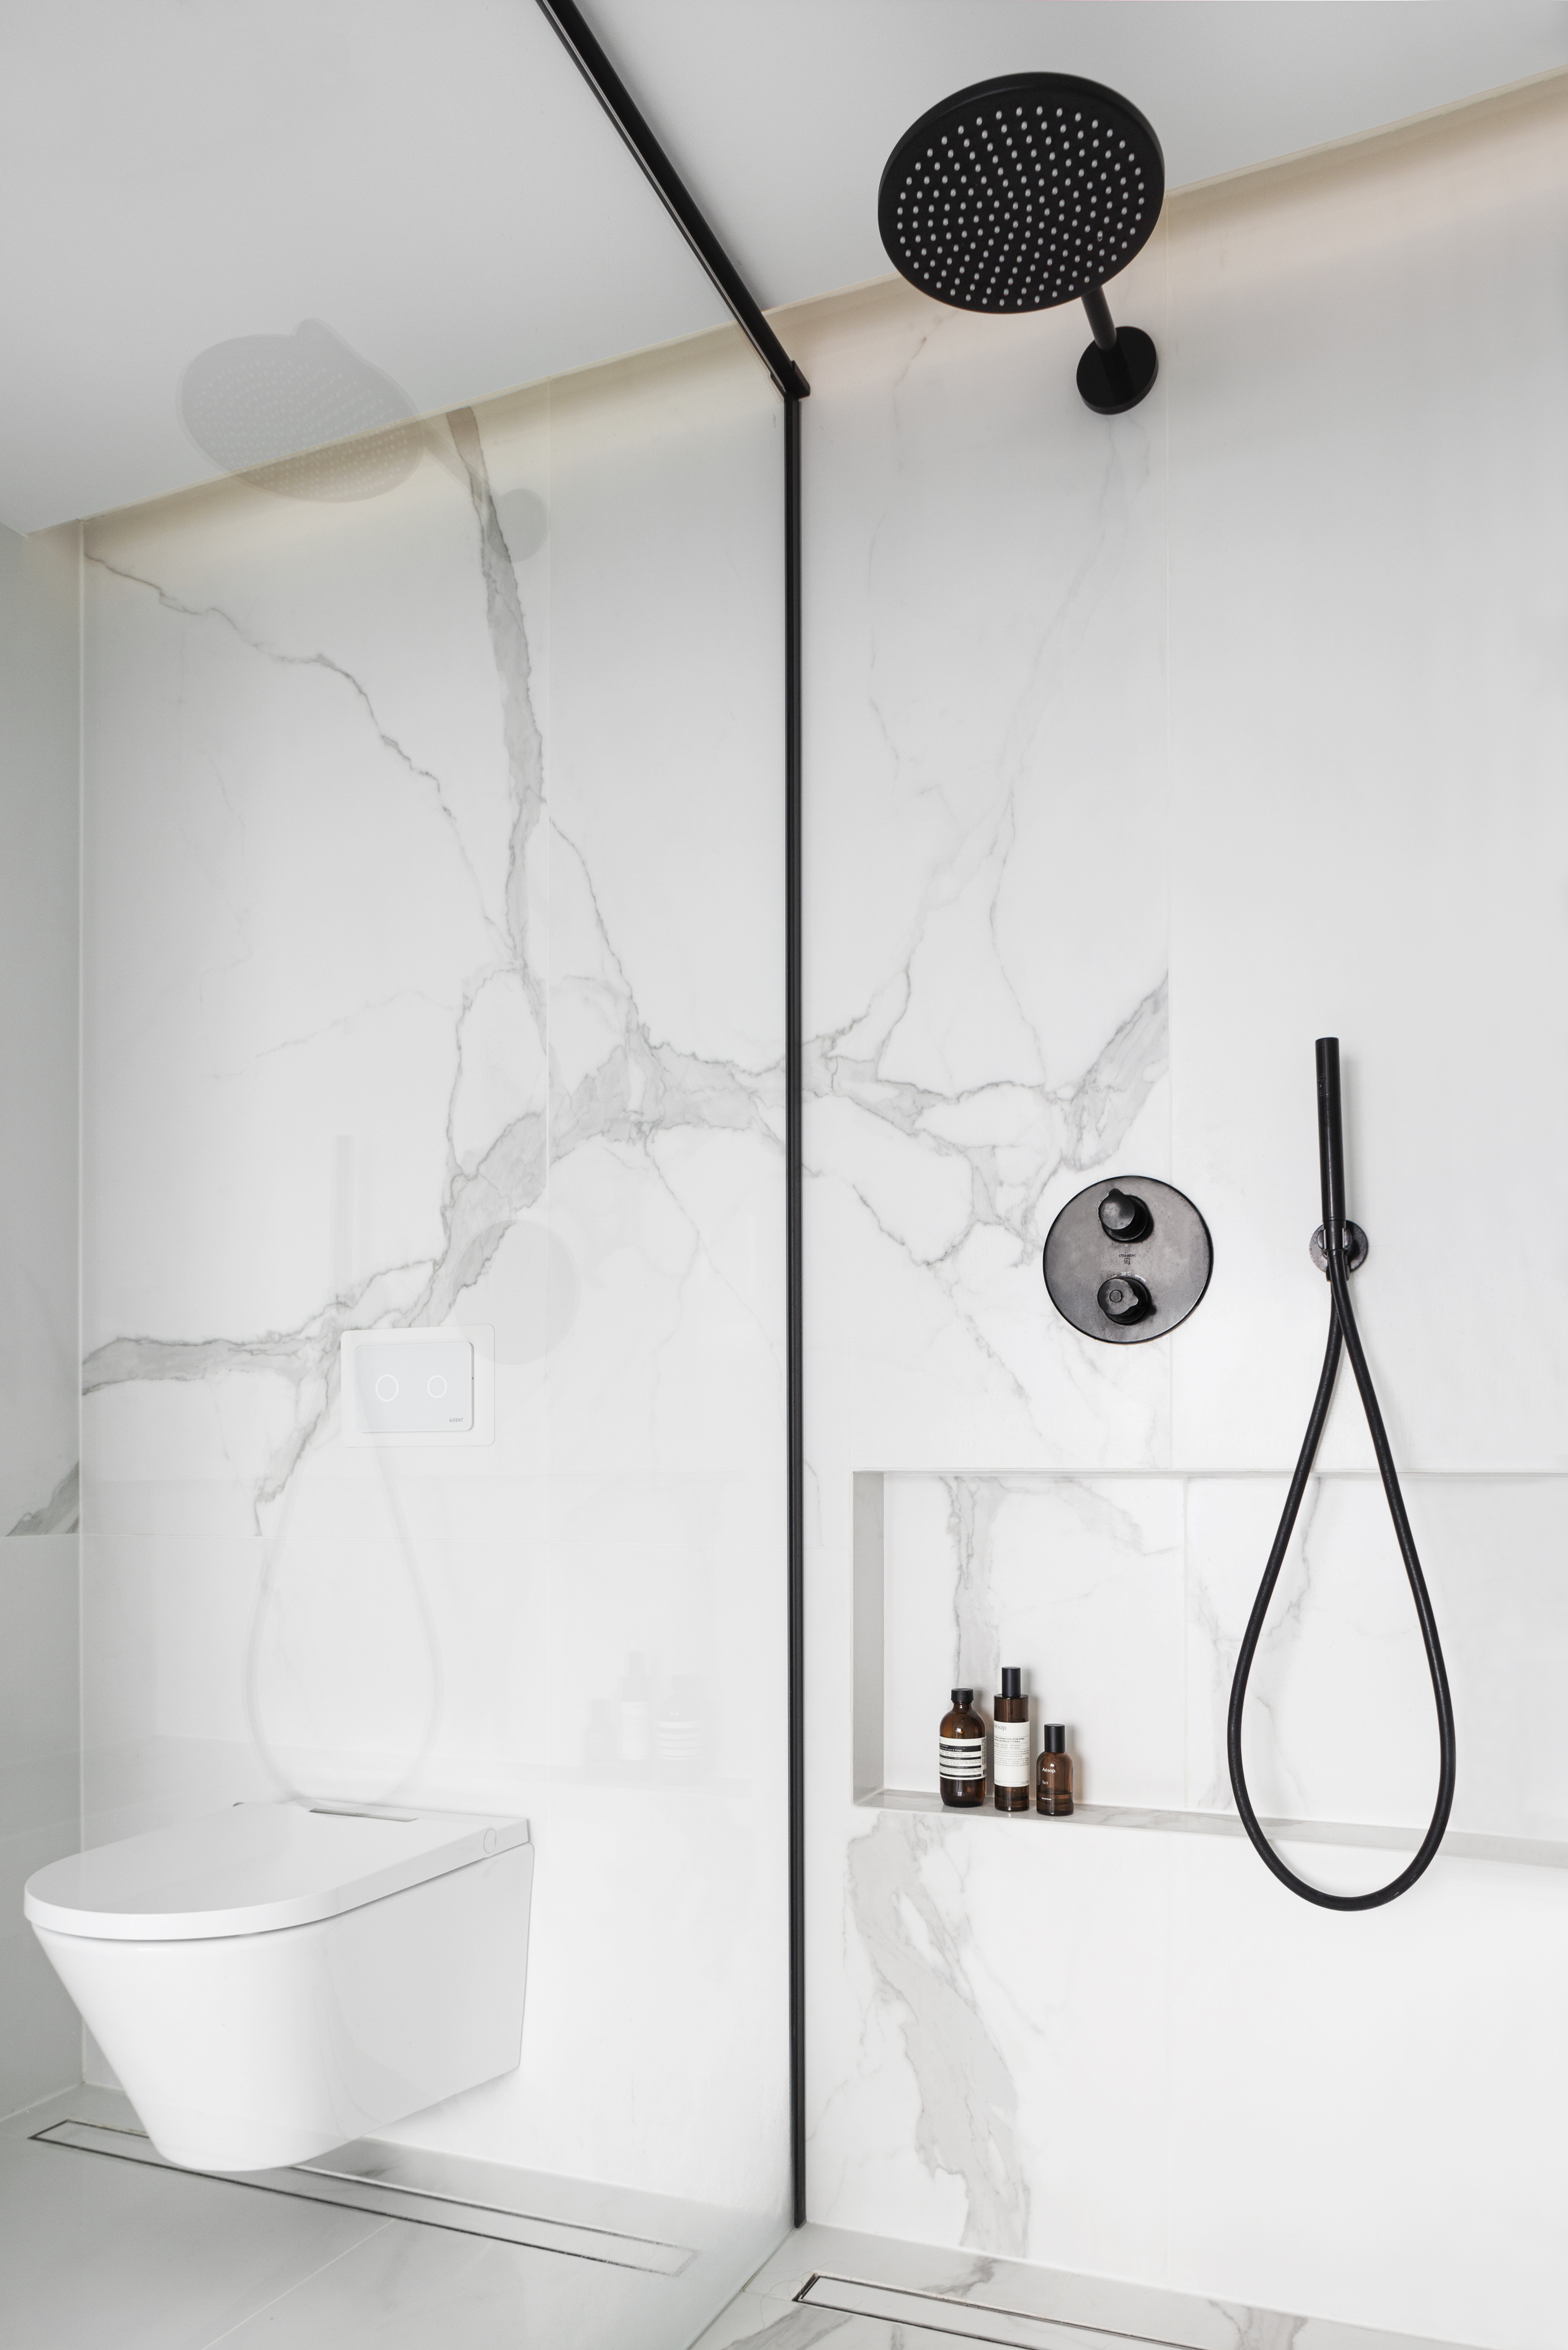 The pursuit of happiness reflected in the luxury apartment by Muxin Studio - Bathroom